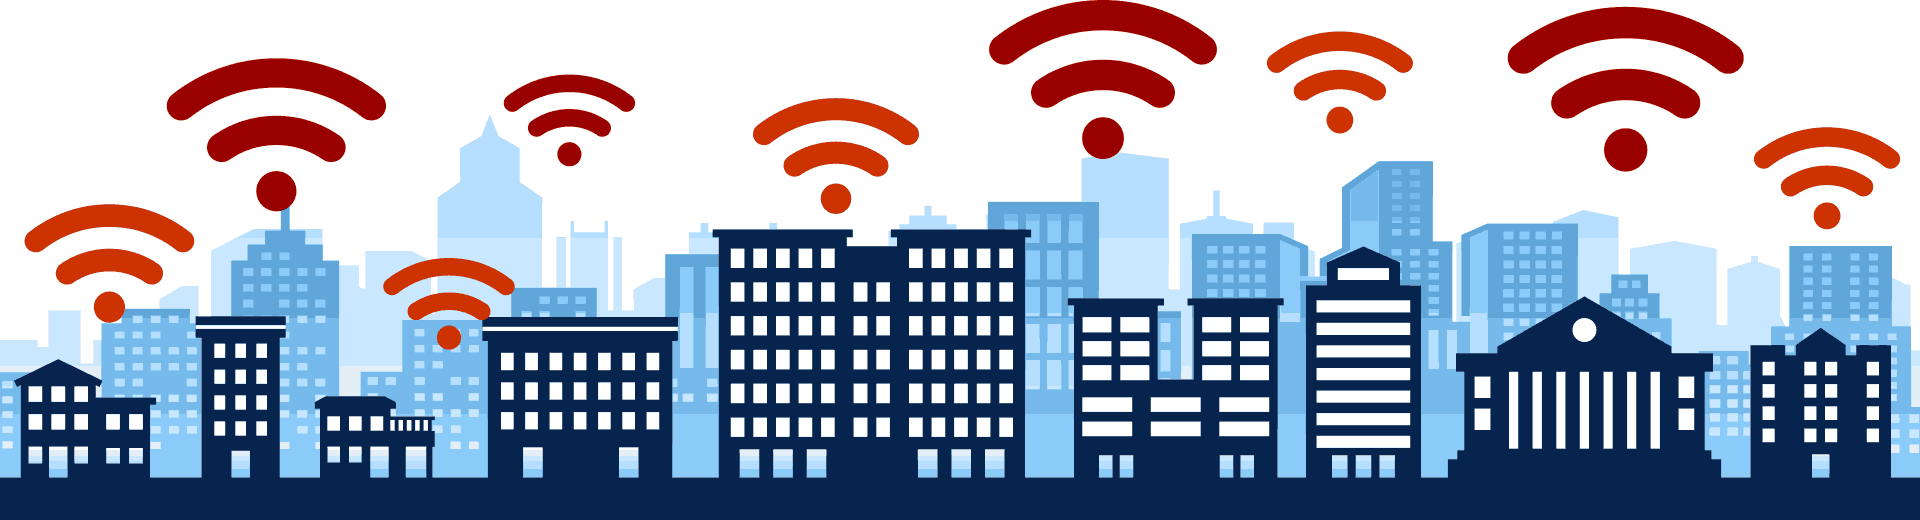 Deployment and maintenance of WLAN networks